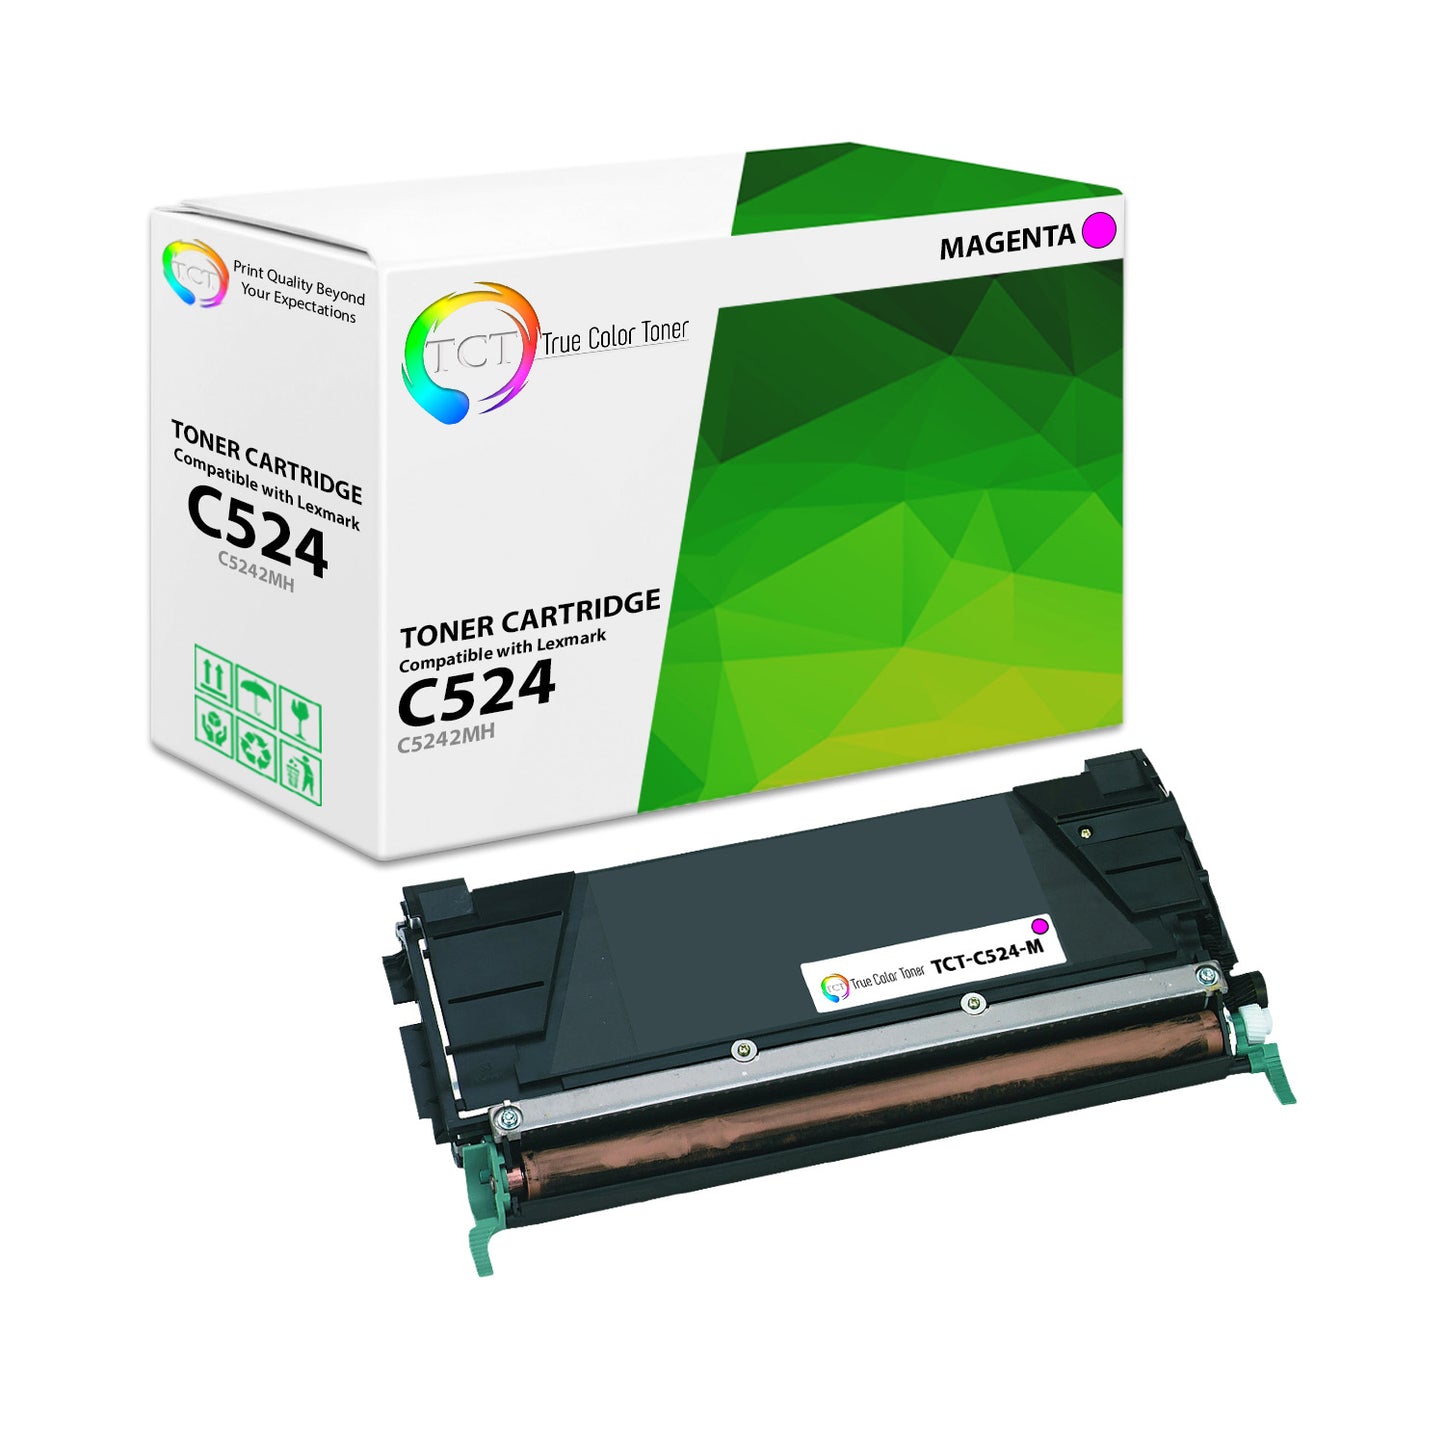 TCT Remanufactured HY Toner Cartridge Replacement for the Lexmark C524 Series - 1 Pack Magenta